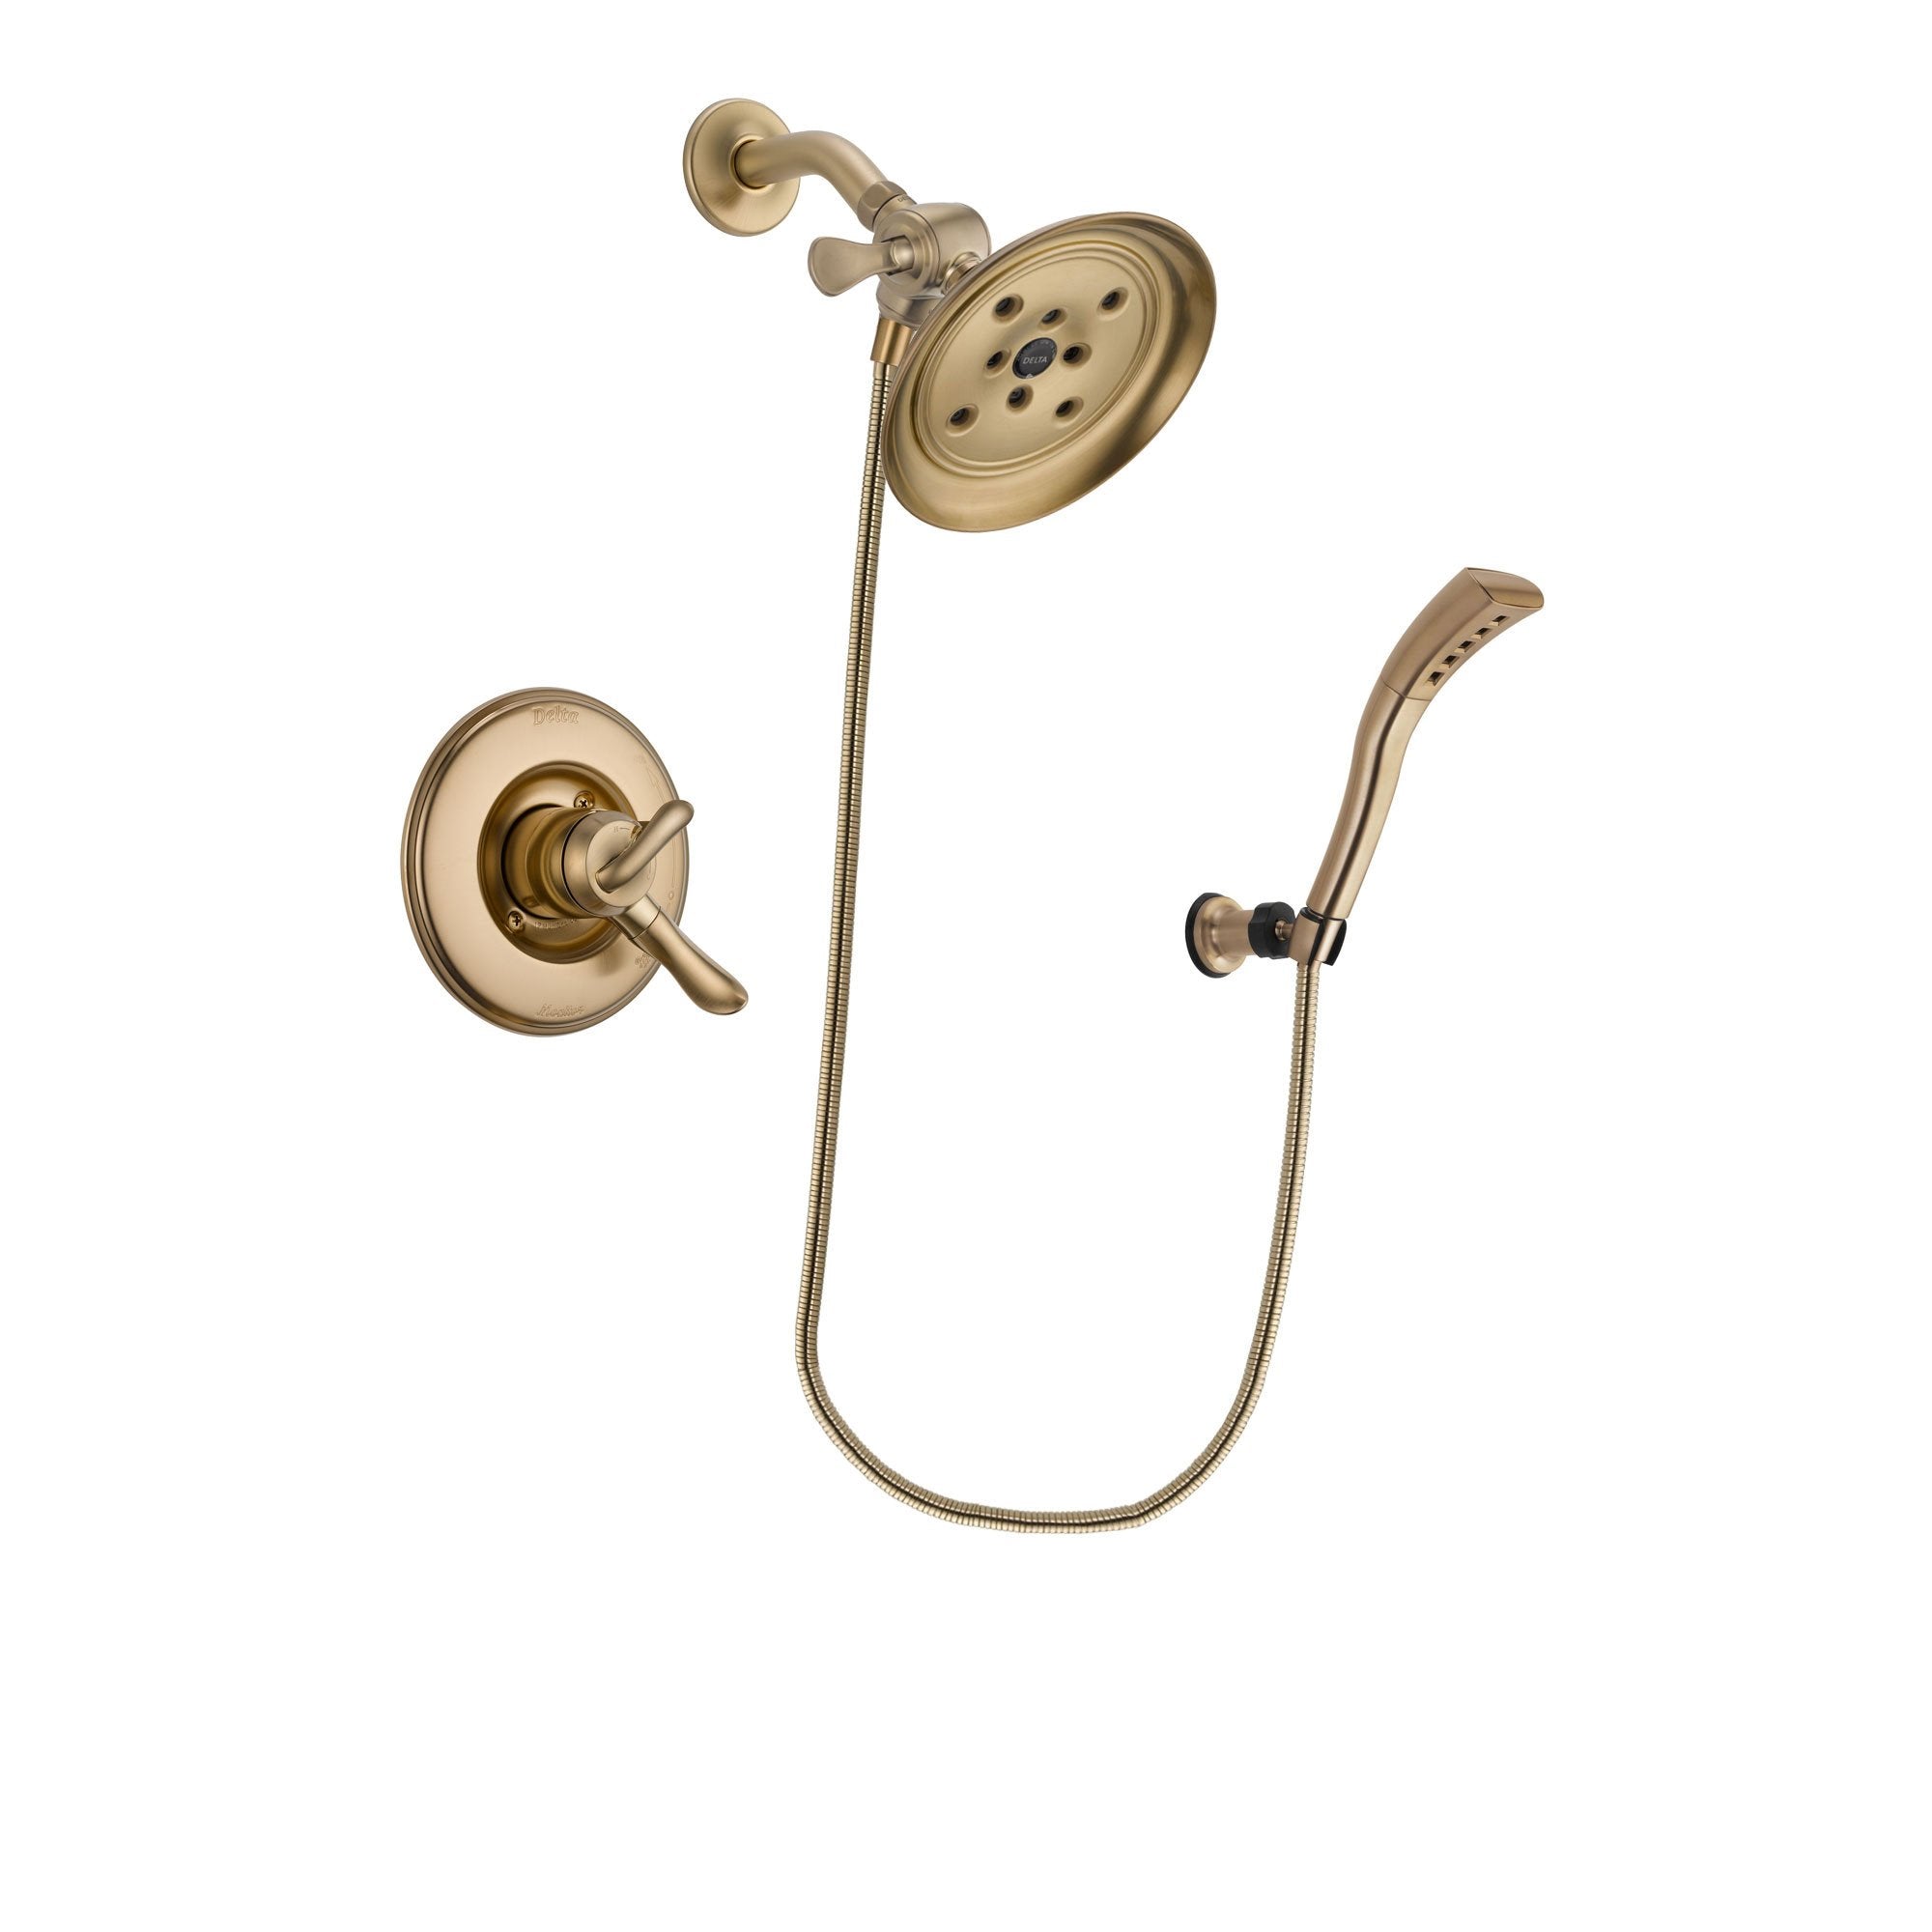 Delta Linden Champagne Bronze Finish Dual Control Shower Faucet System Package with Large Rain Shower Head and Modern Wall Mount Personal Handheld Shower Spray Includes Rough-in Valve DSP3704V